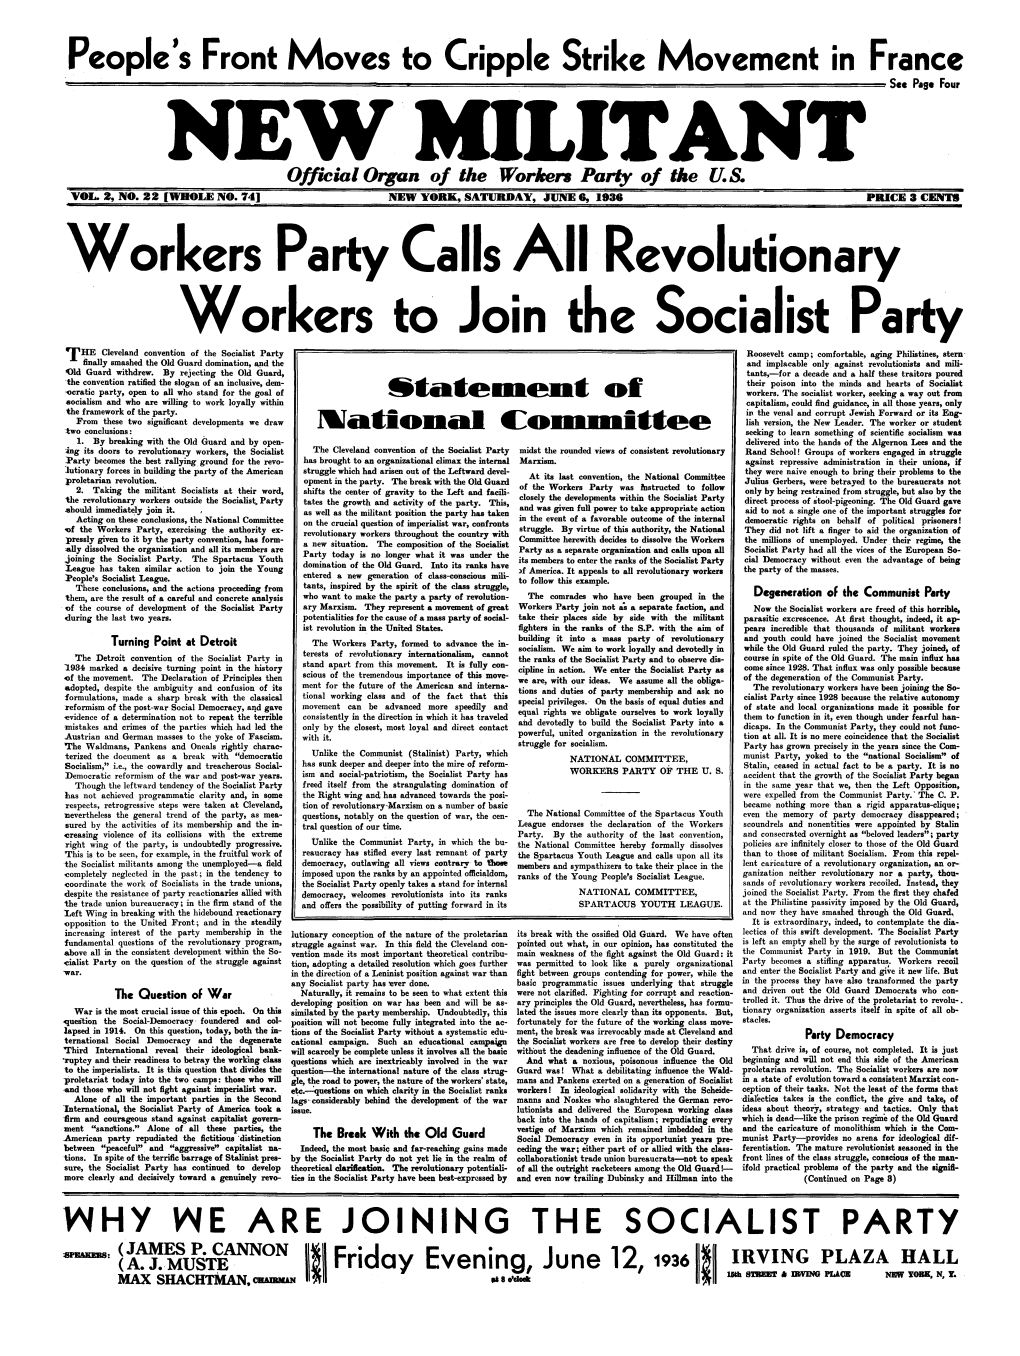 Workers Party Calls a Ll Revolutionary Workers to Join the Socialist Party